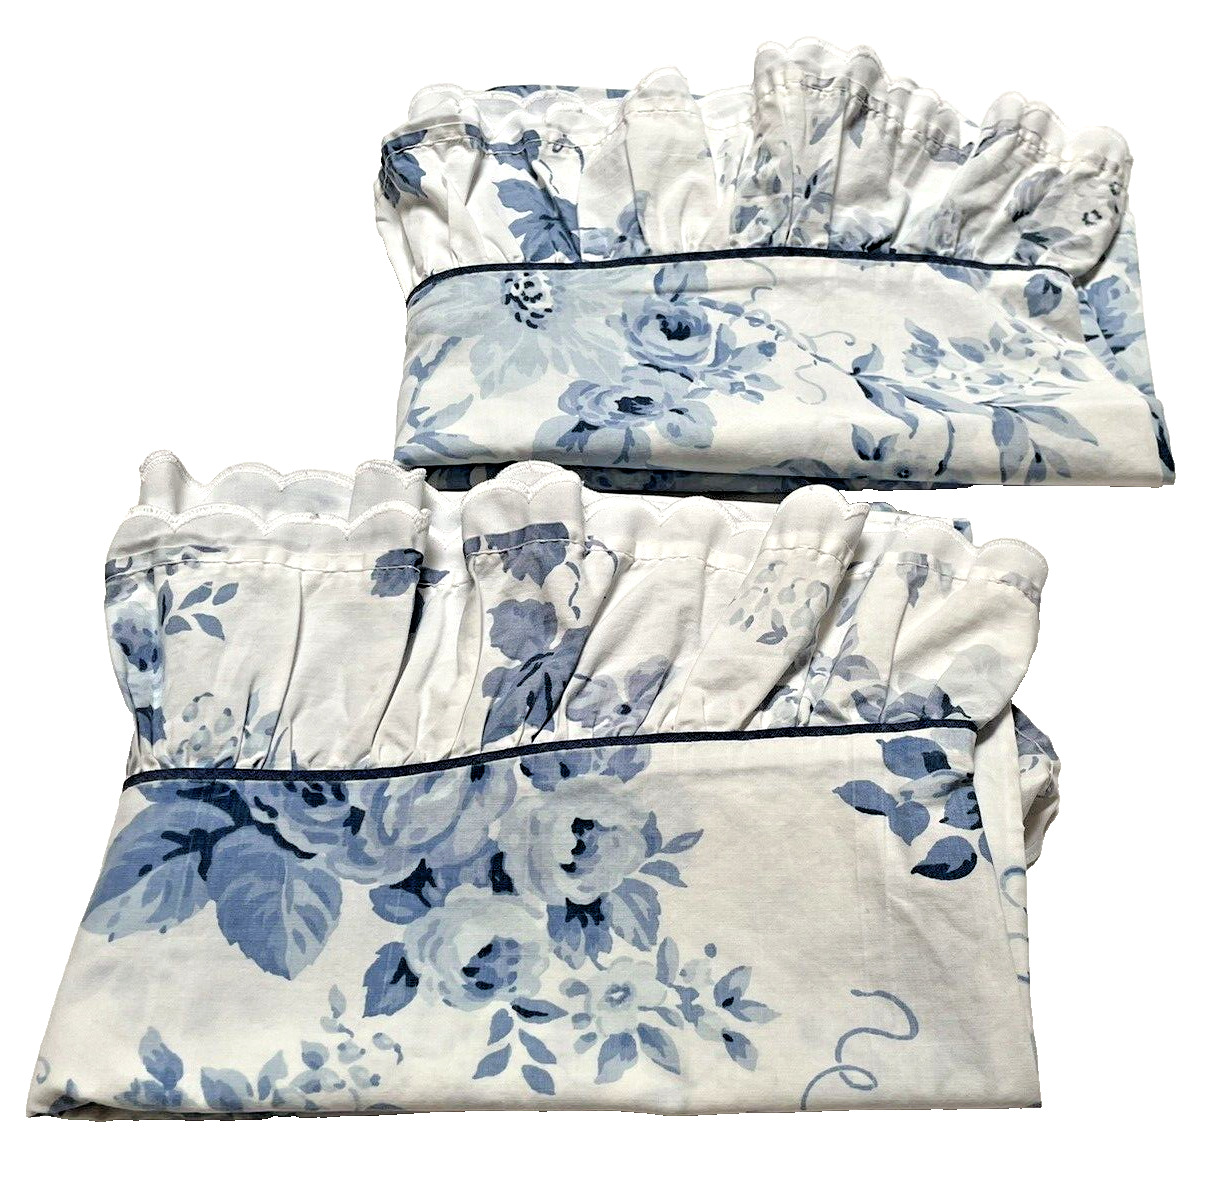 Set Vintage Ruffle Pillowcases Cannon White Blue Roses Country Shabby Queen Size